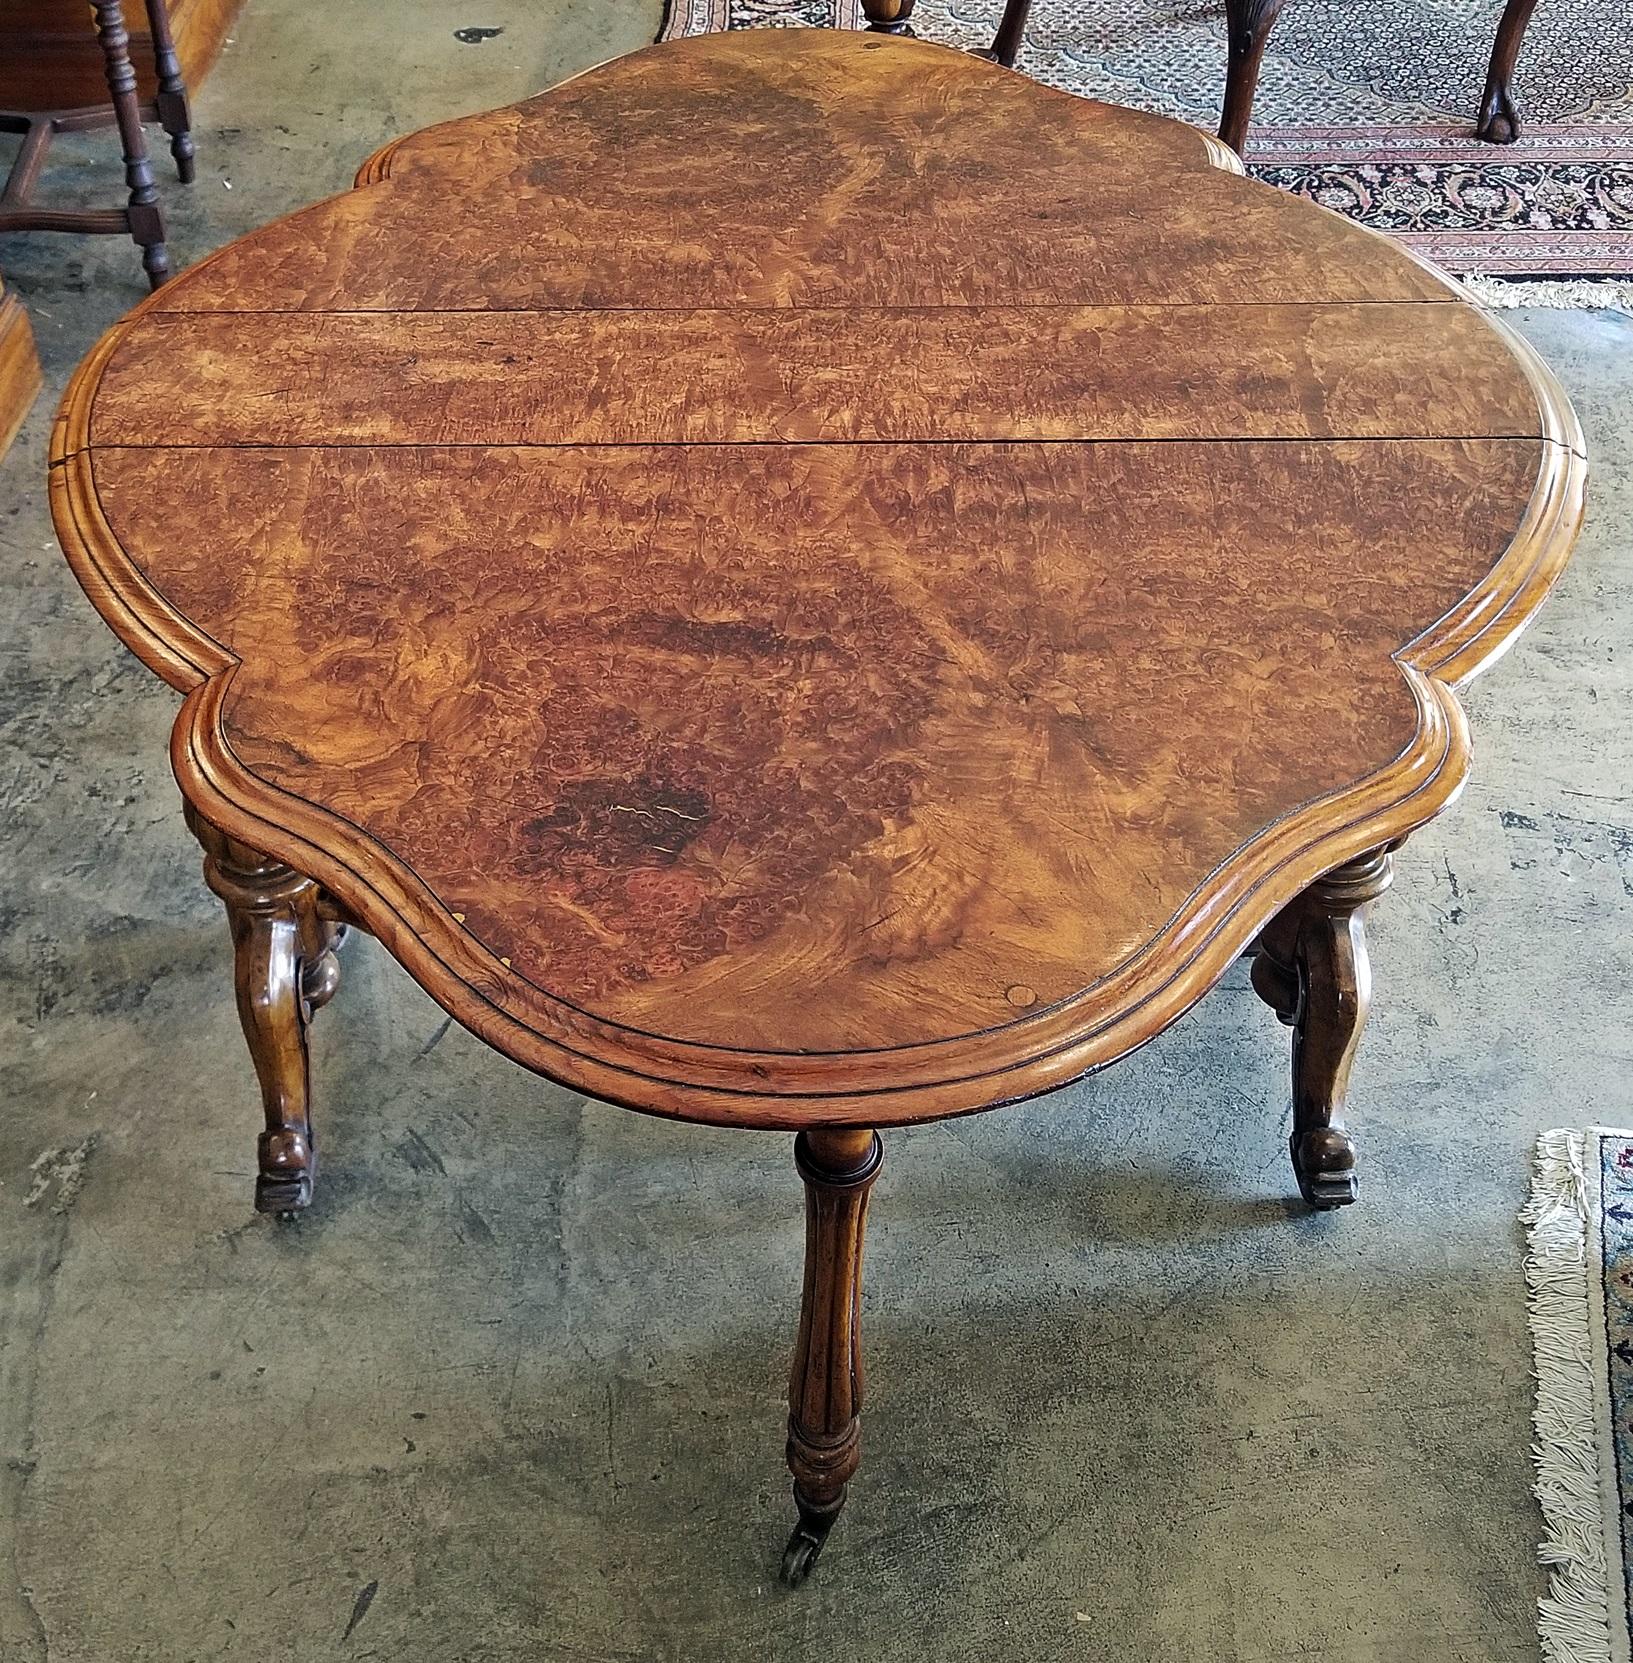 sutherland table history